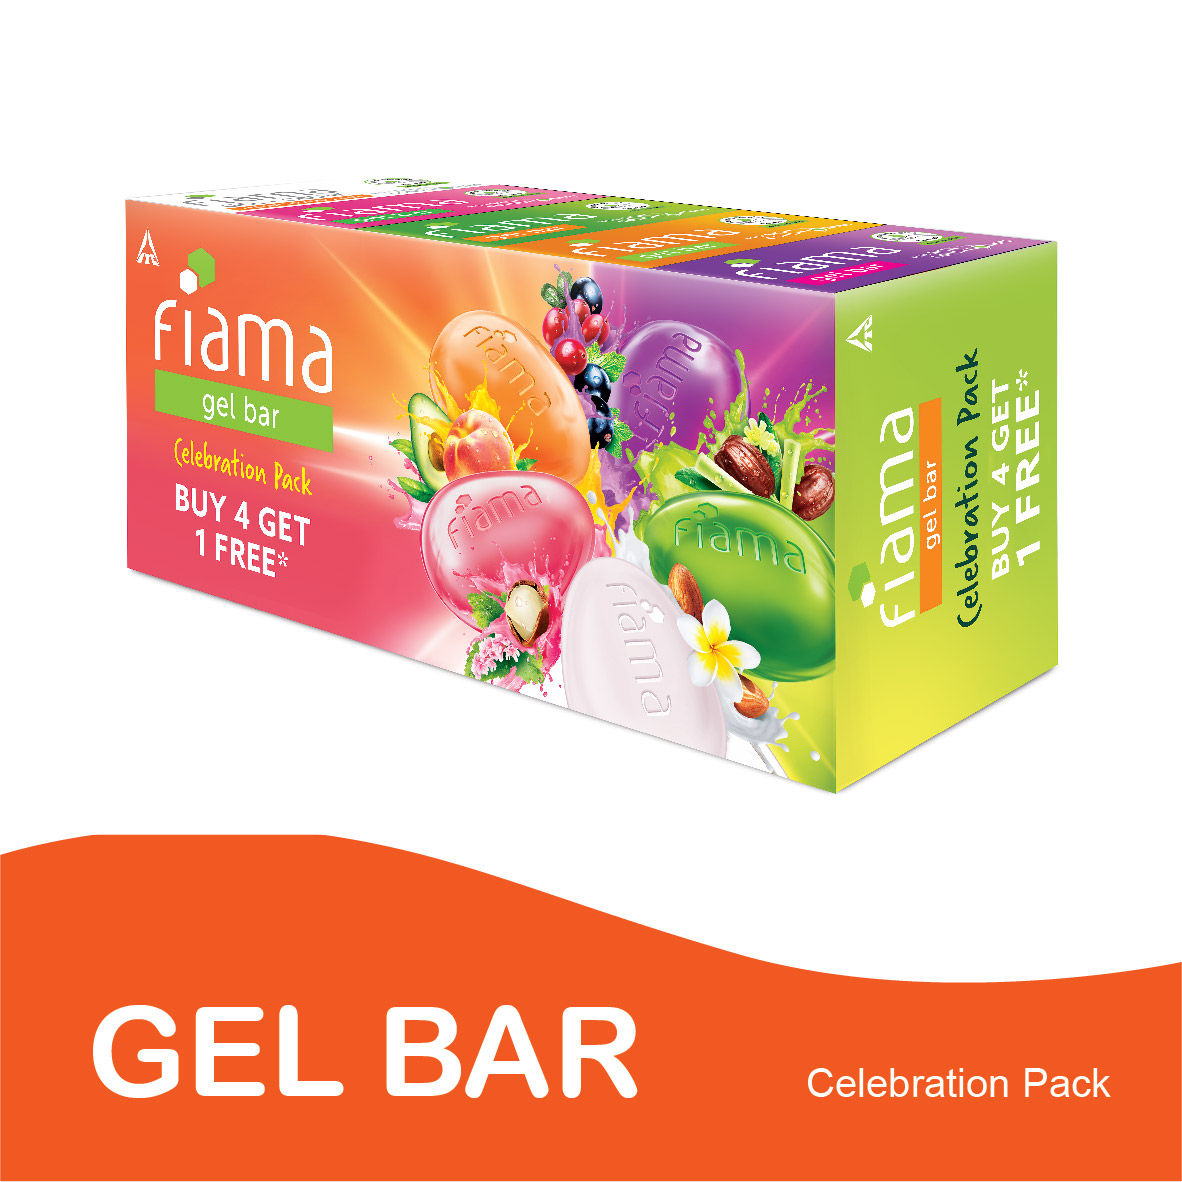 Buy Fiama Gel Bar Celebration Pack With 5 unique Gel Bars & Skin Conditioners For Moisturized Skin, 125g Soap (Buy 4 Get 1 Free) - Purplle